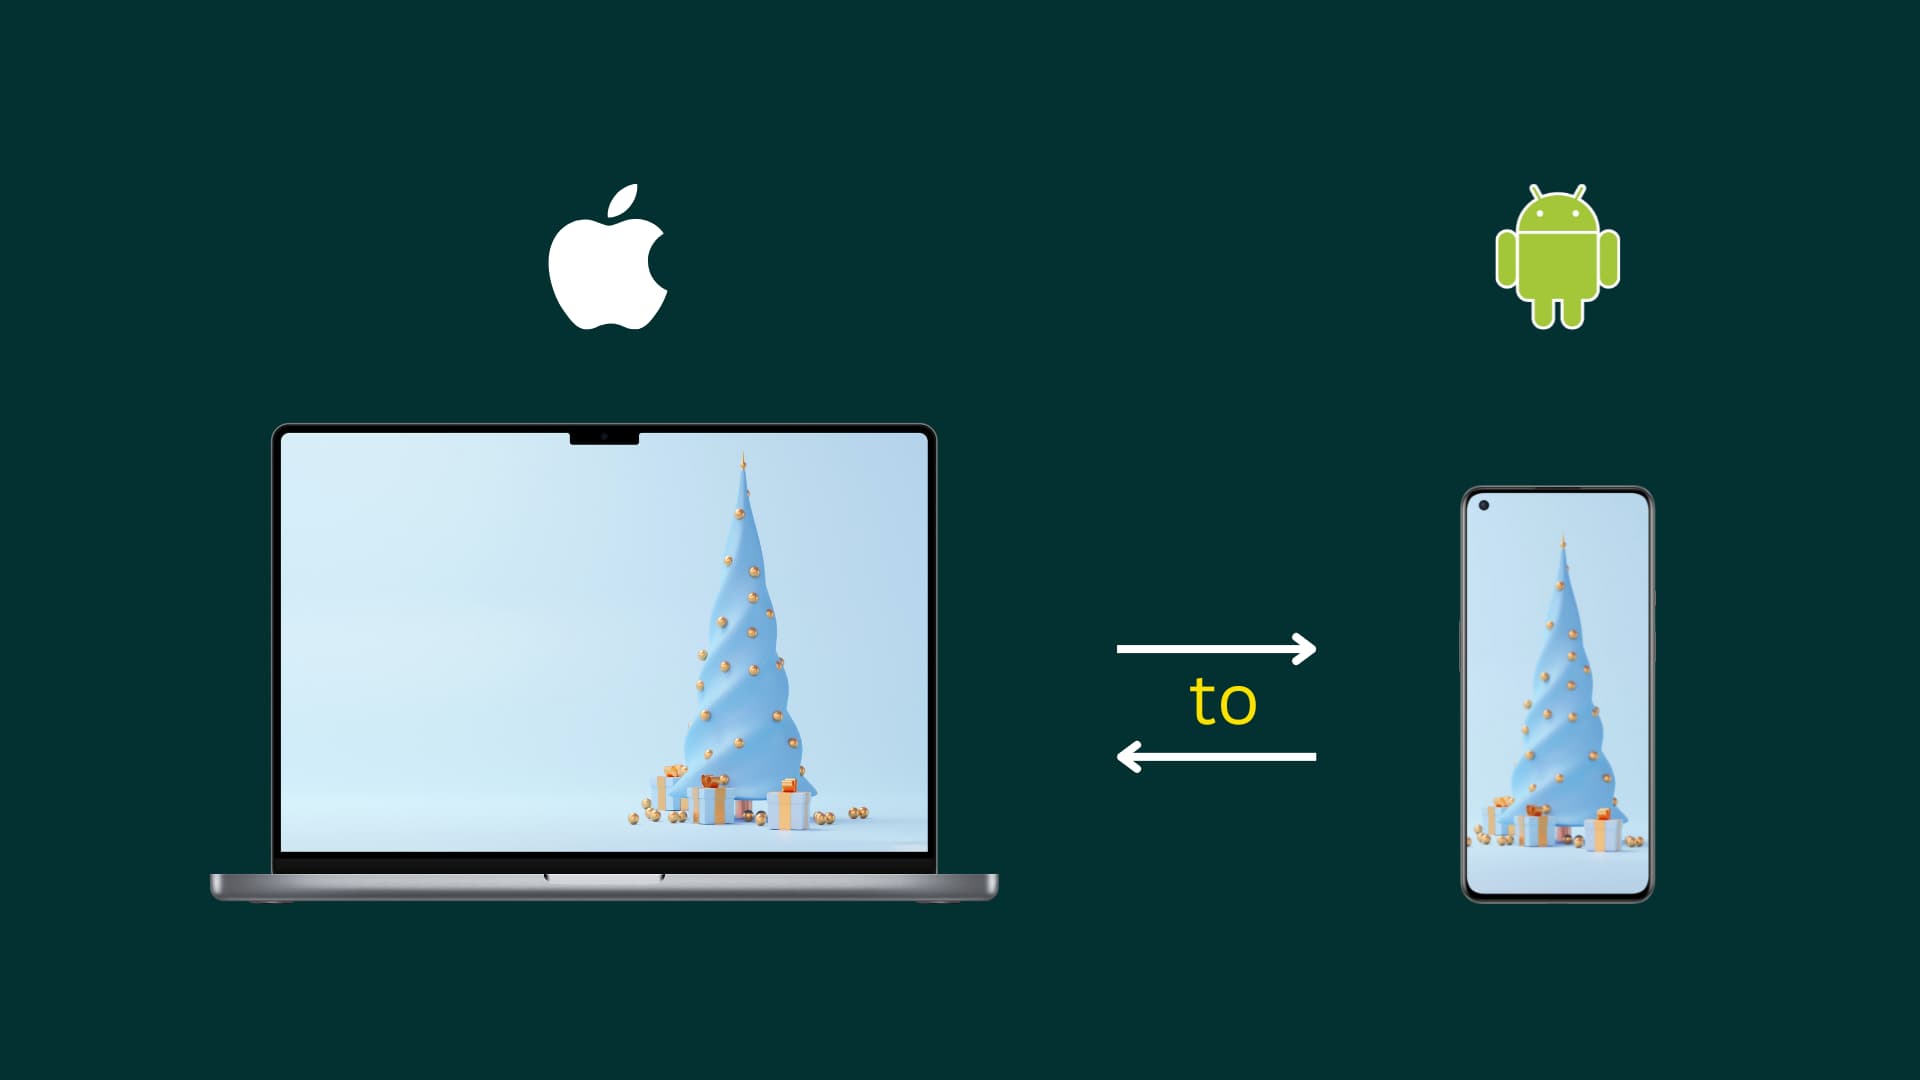 Image composition showing transfer of files from MacBook to Android phone and Android phone to Mac